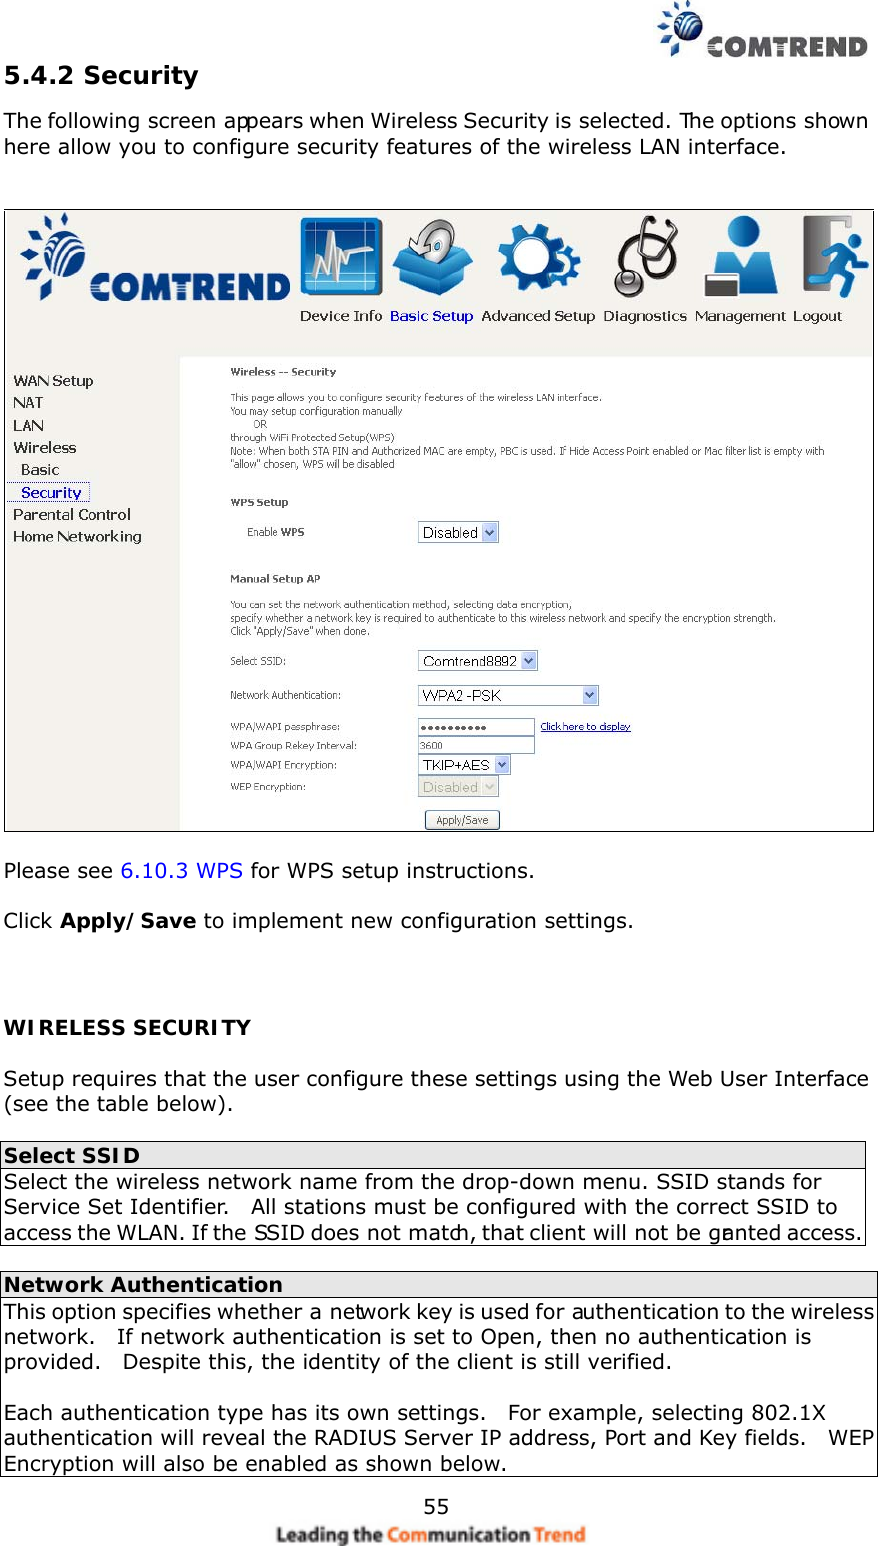    555.4.2 Security The following screen appears when Wireless Security is selected. The options shown here allow you to configure security features of the wireless LAN interface.      Please see 6.10.3 WPS for WPS setup instructions.  Click Apply/Save to implement new configuration settings.  WIRELESS SECURITY  Setup requires that the user configure these settings using the Web User Interface (see the table below).   Select SSID Select the wireless network name from the drop-down menu. SSID stands for Service Set Identifier.    All stations must be configured with the correct SSID to access the WLAN. If the SSID does not match, that client will not be granted access.  Network Authentication This option specifies whether a network key is used for authentication to the wireless network.    If network authentication is set to Open, then no authentication is provided.    Despite this, the identity of the client is still verified.      Each authentication type has its own settings.    For example, selecting 802.1X authentication will reveal the RADIUS Server IP address, Port and Key fields.    WEP Encryption will also be enabled as shown below. 